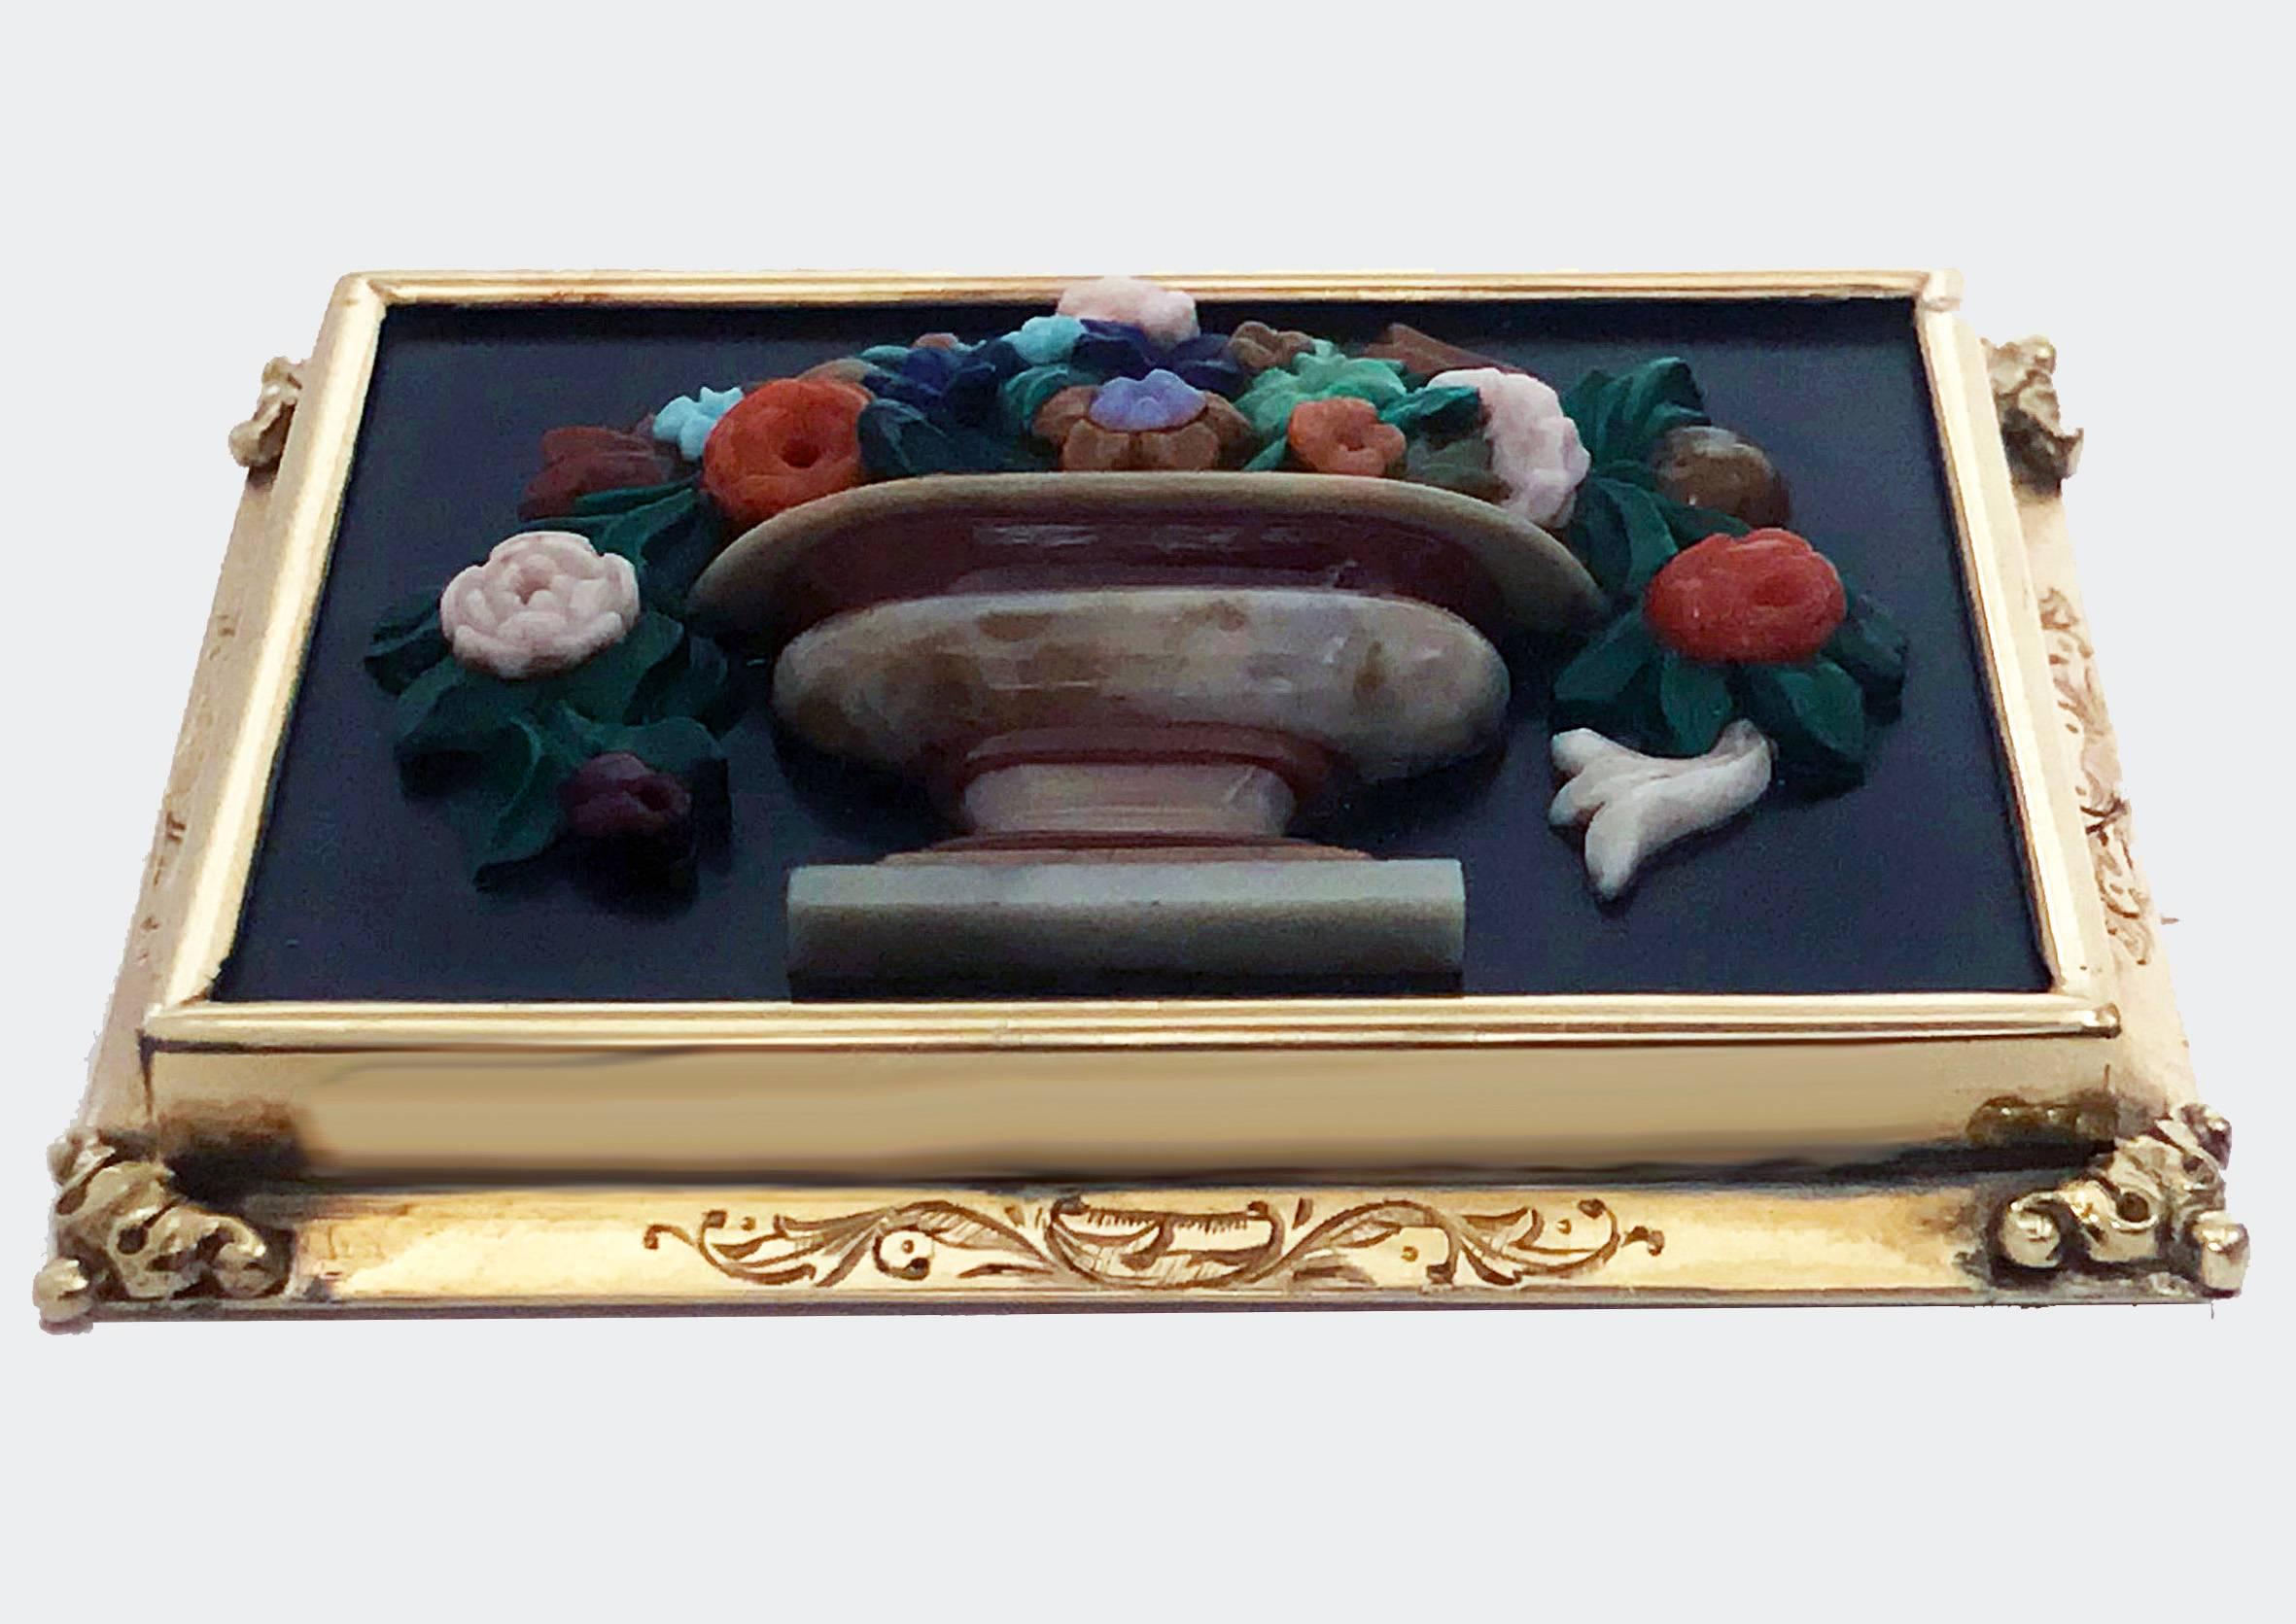 Exceptionally Fine bouquet of flowers Brooch Pin, carved chalcedony on basalt within gold frame (tests as 15K), 19th century. The rectangular plaque form Brooch with multi colour carved chalcedony agates depicting an urn shaped vase of flowers